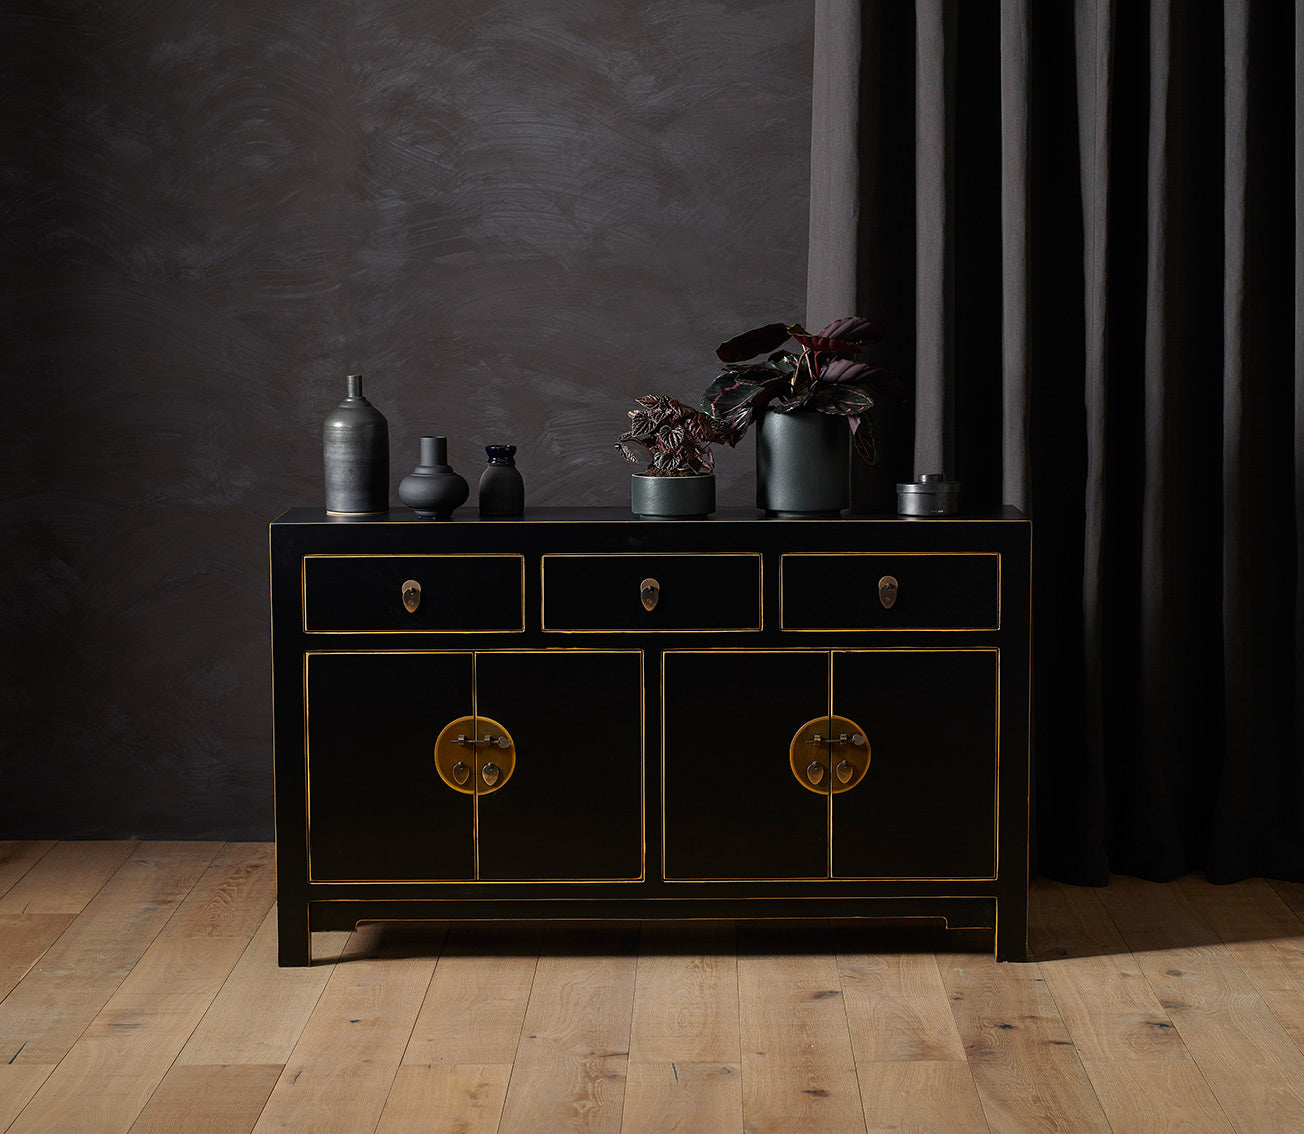 Qing black and gilt sideboard, large